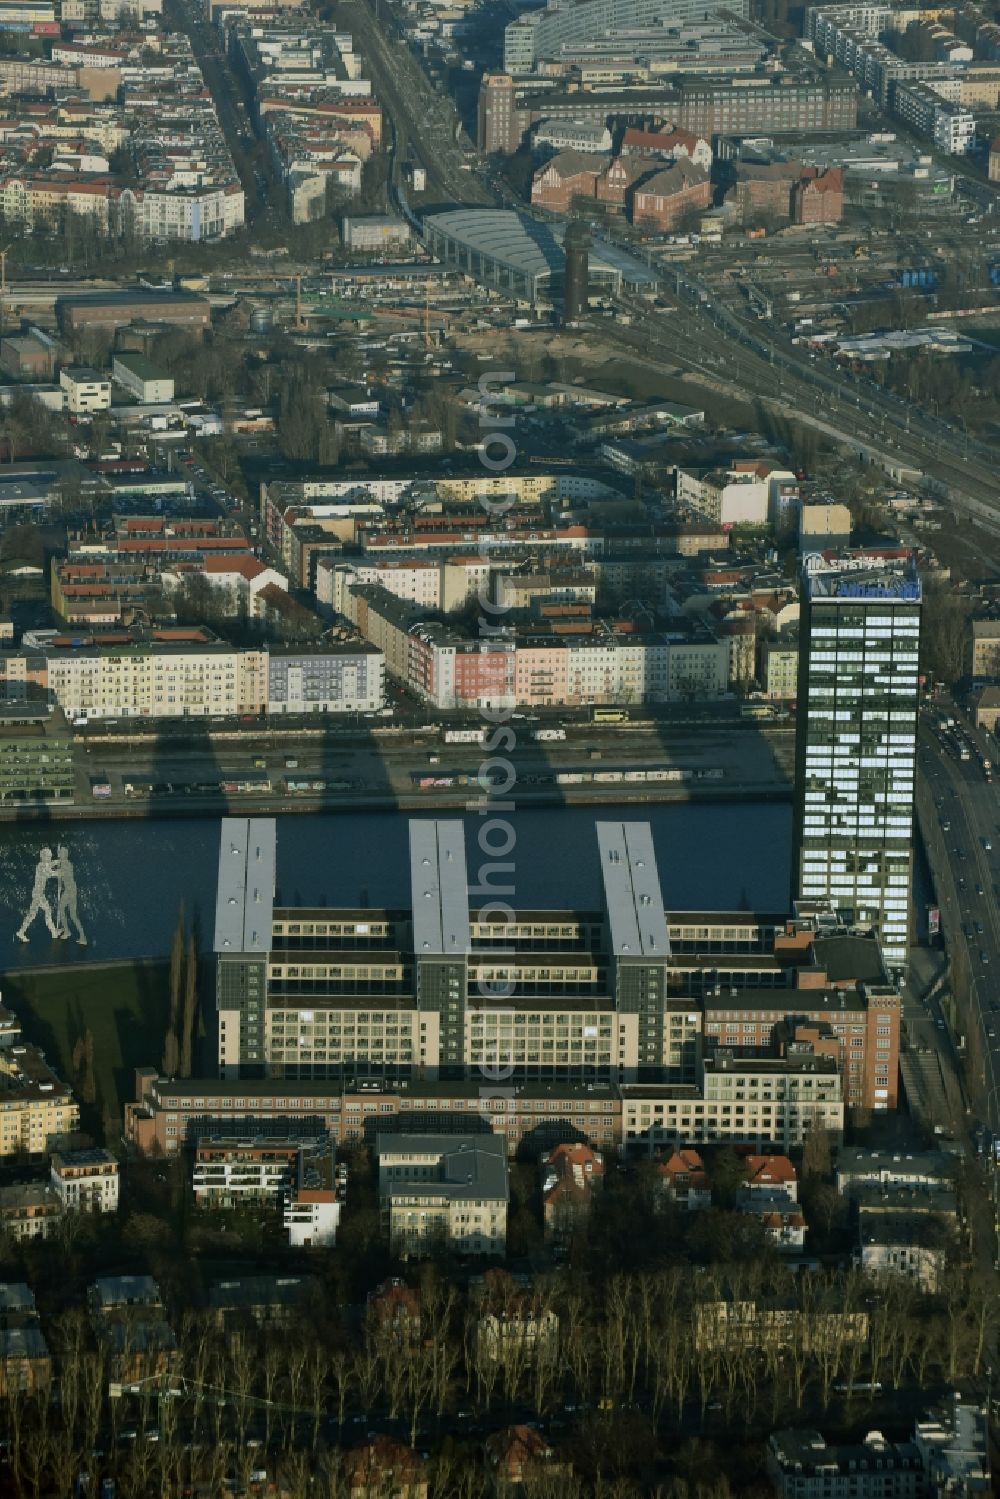 Berlin from above - View of the roof of the Allianz-Tower in the district Treptow of Berlin. The Allianz-Tower belongs to the building complex Treptowers. Allianz is a german multifunctional financial services company